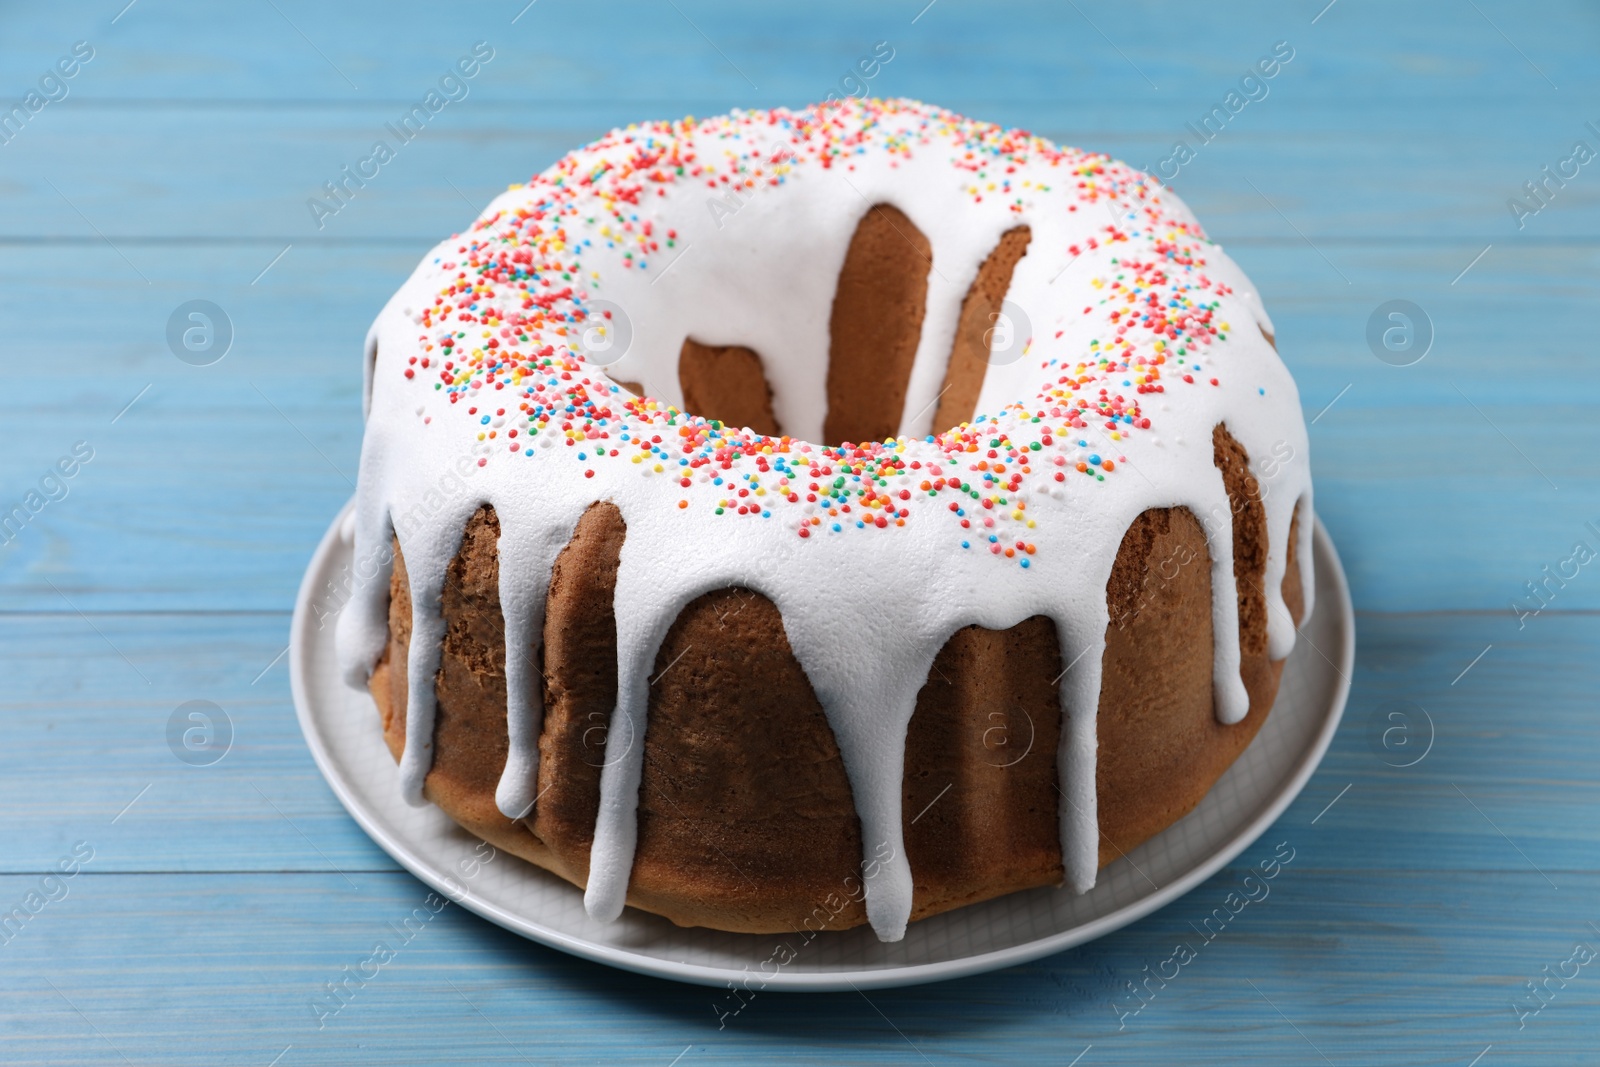 Photo of Glazed Easter cake with sprinkles on light blue wooden table